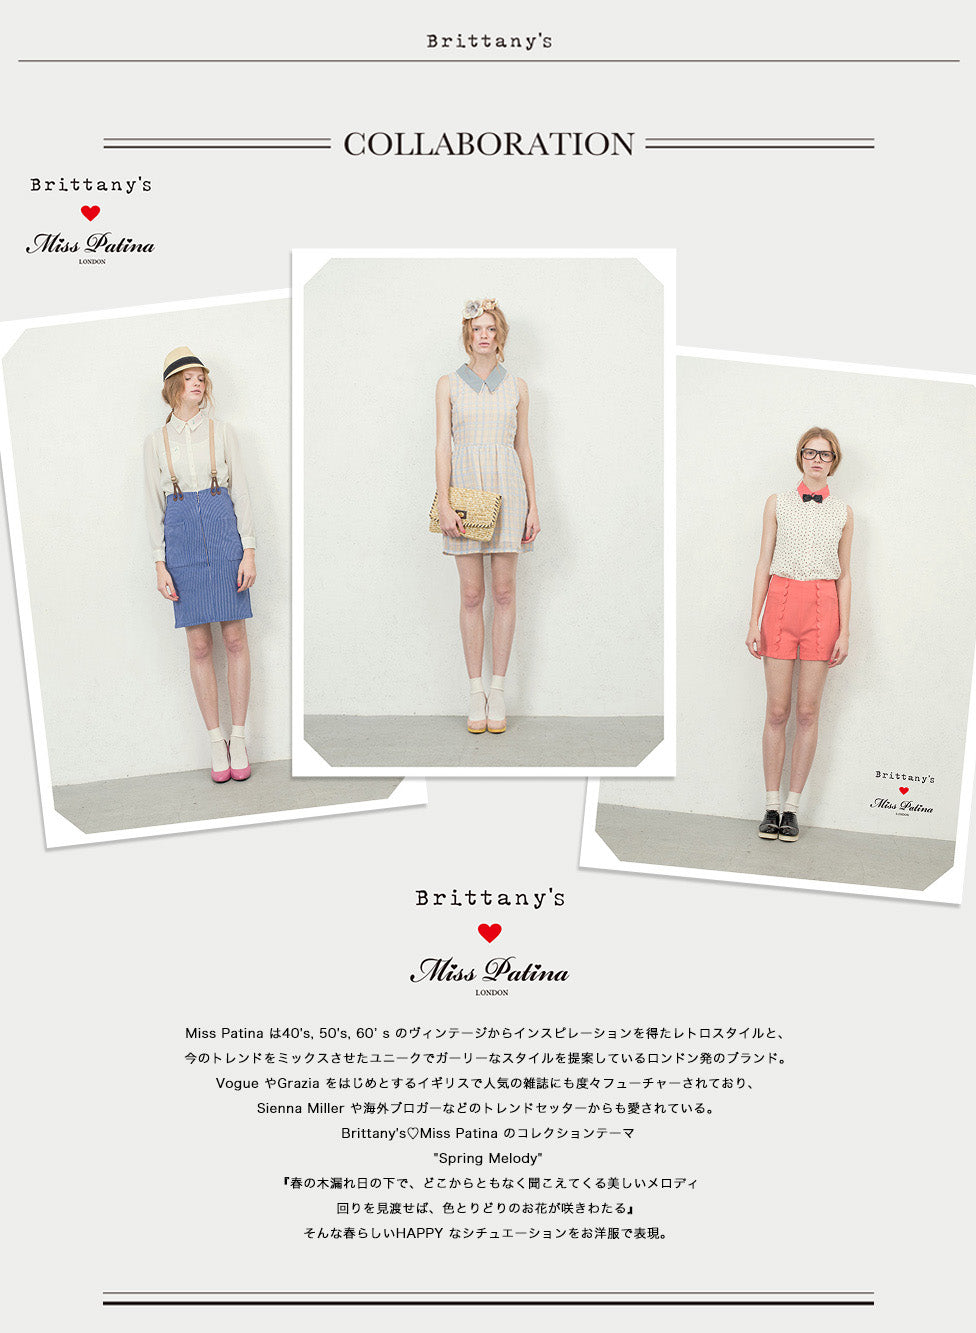 Brittany’s ♥ Miss Patina - Our Exclusive Collaboration With Japanese Fashion Label